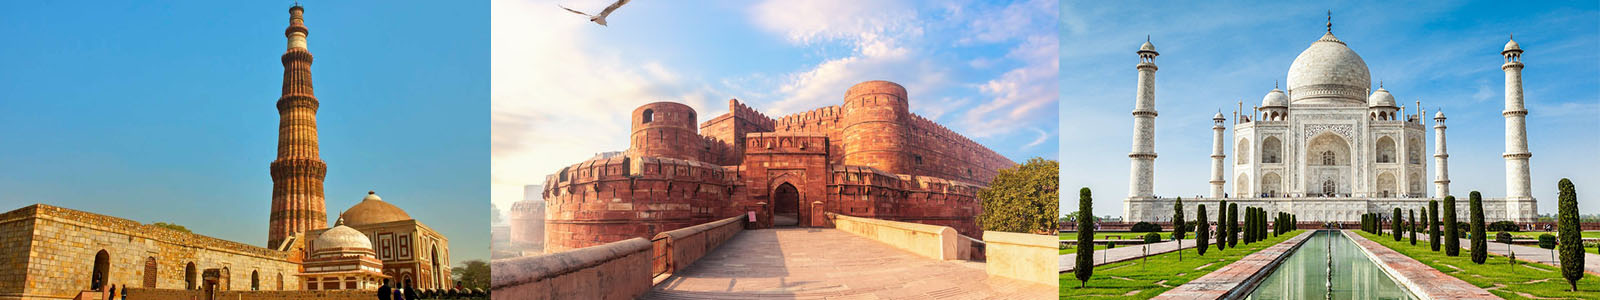 Taj Mahal And Agra Fort Private Day Tour From Delhi